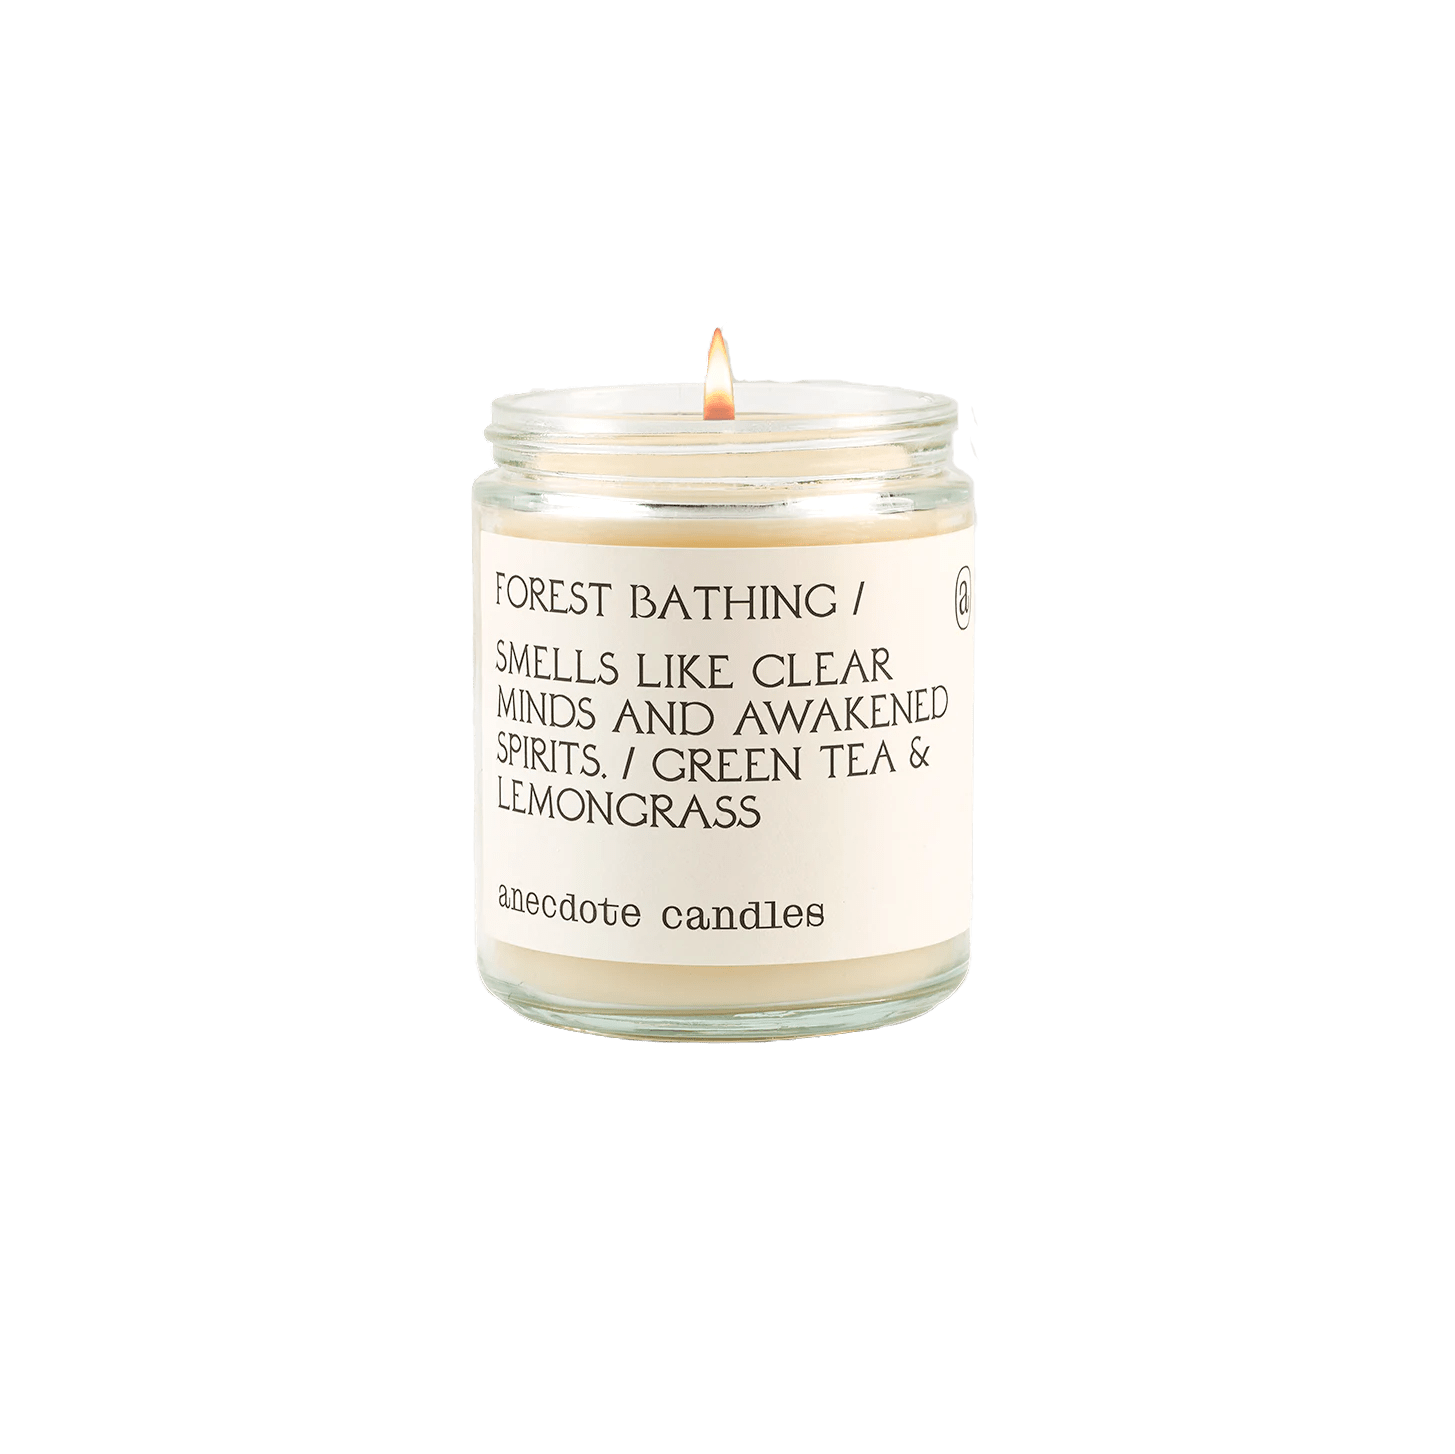 Build Your Own Custom Anecdote Candle